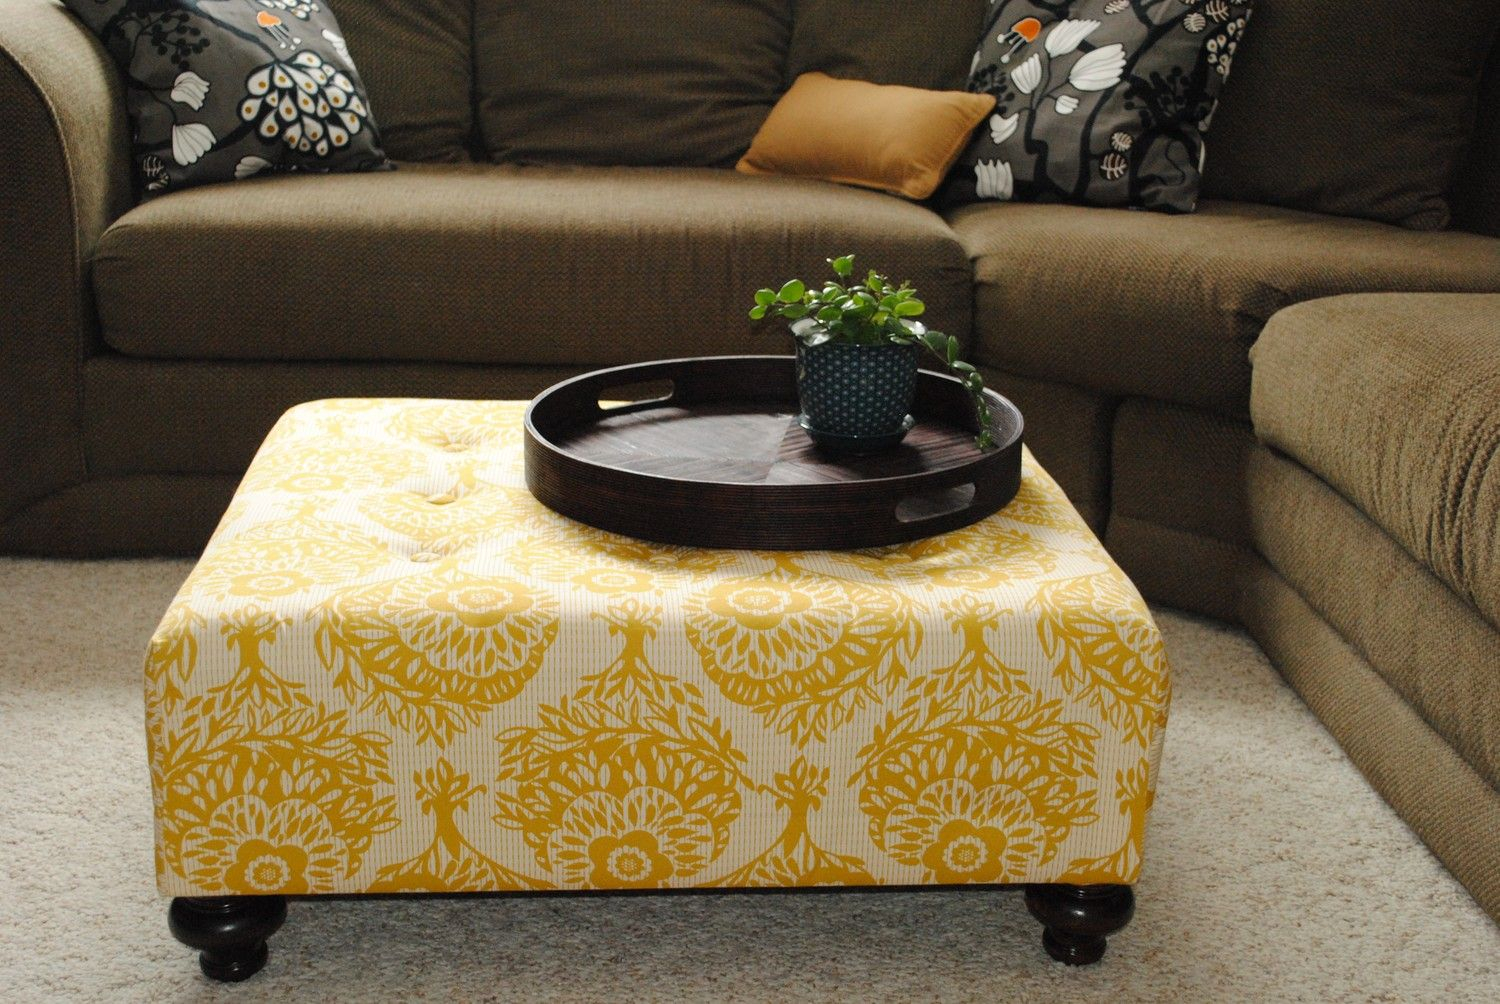 I Like The Idea Of Having An Ottoman Instead Of A Coffee Table in measurements 1500 X 1004